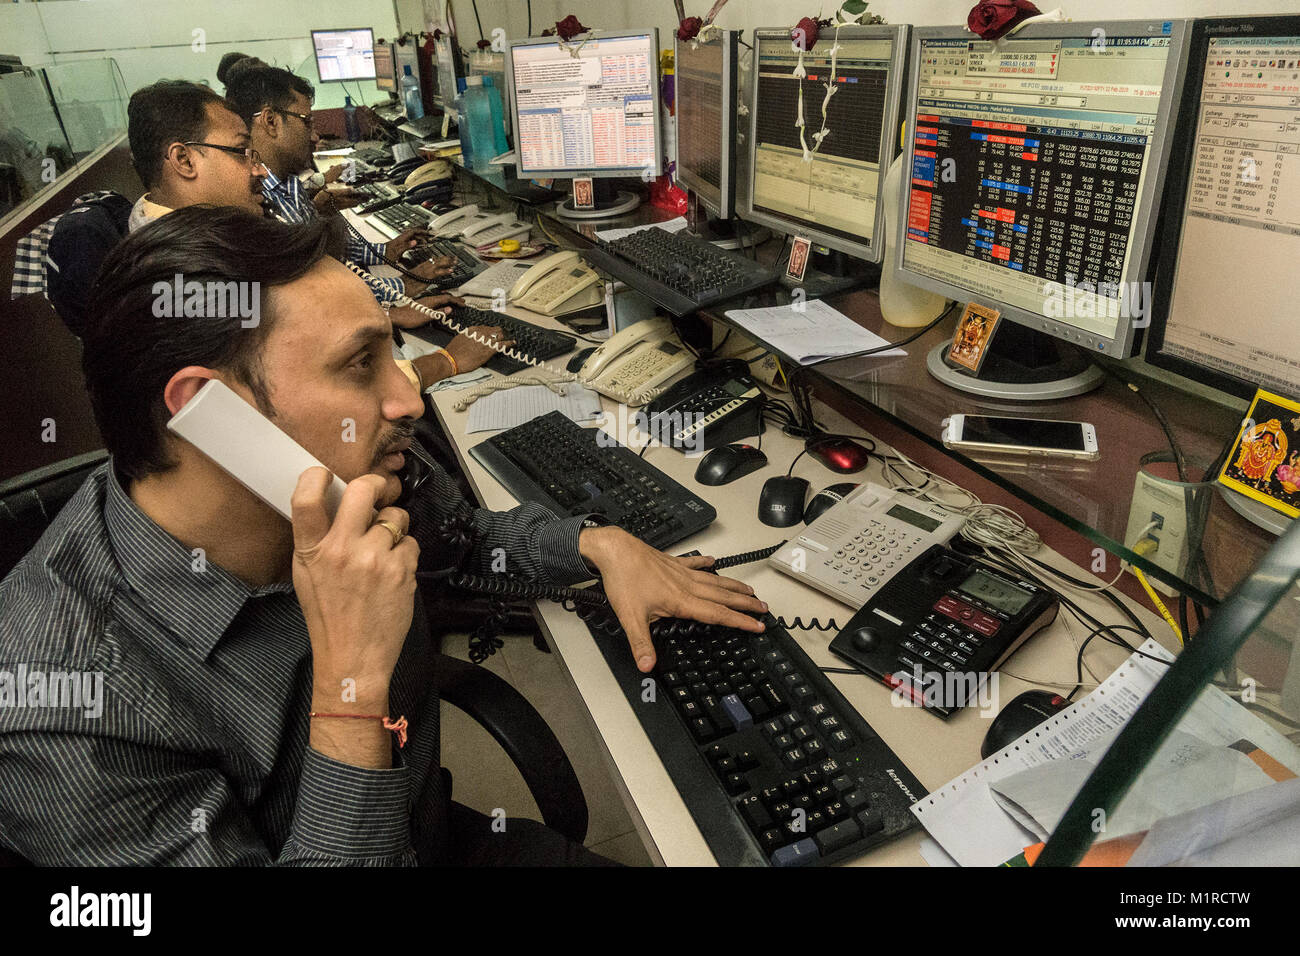 (180201) -- KOLKATA, Feb. 1, 2018 (Xinhua) -- Stock dealers work at a brokerage house in Kolkata, India, on Feb. 1, 2018. The Indian government on Thursday unveiled its budget for the financial year 2018-19, with a focus on agriculture, infrastructure and healthcare. (Xinhua/Tumpa Mondal)(jmmn) Stock Photo